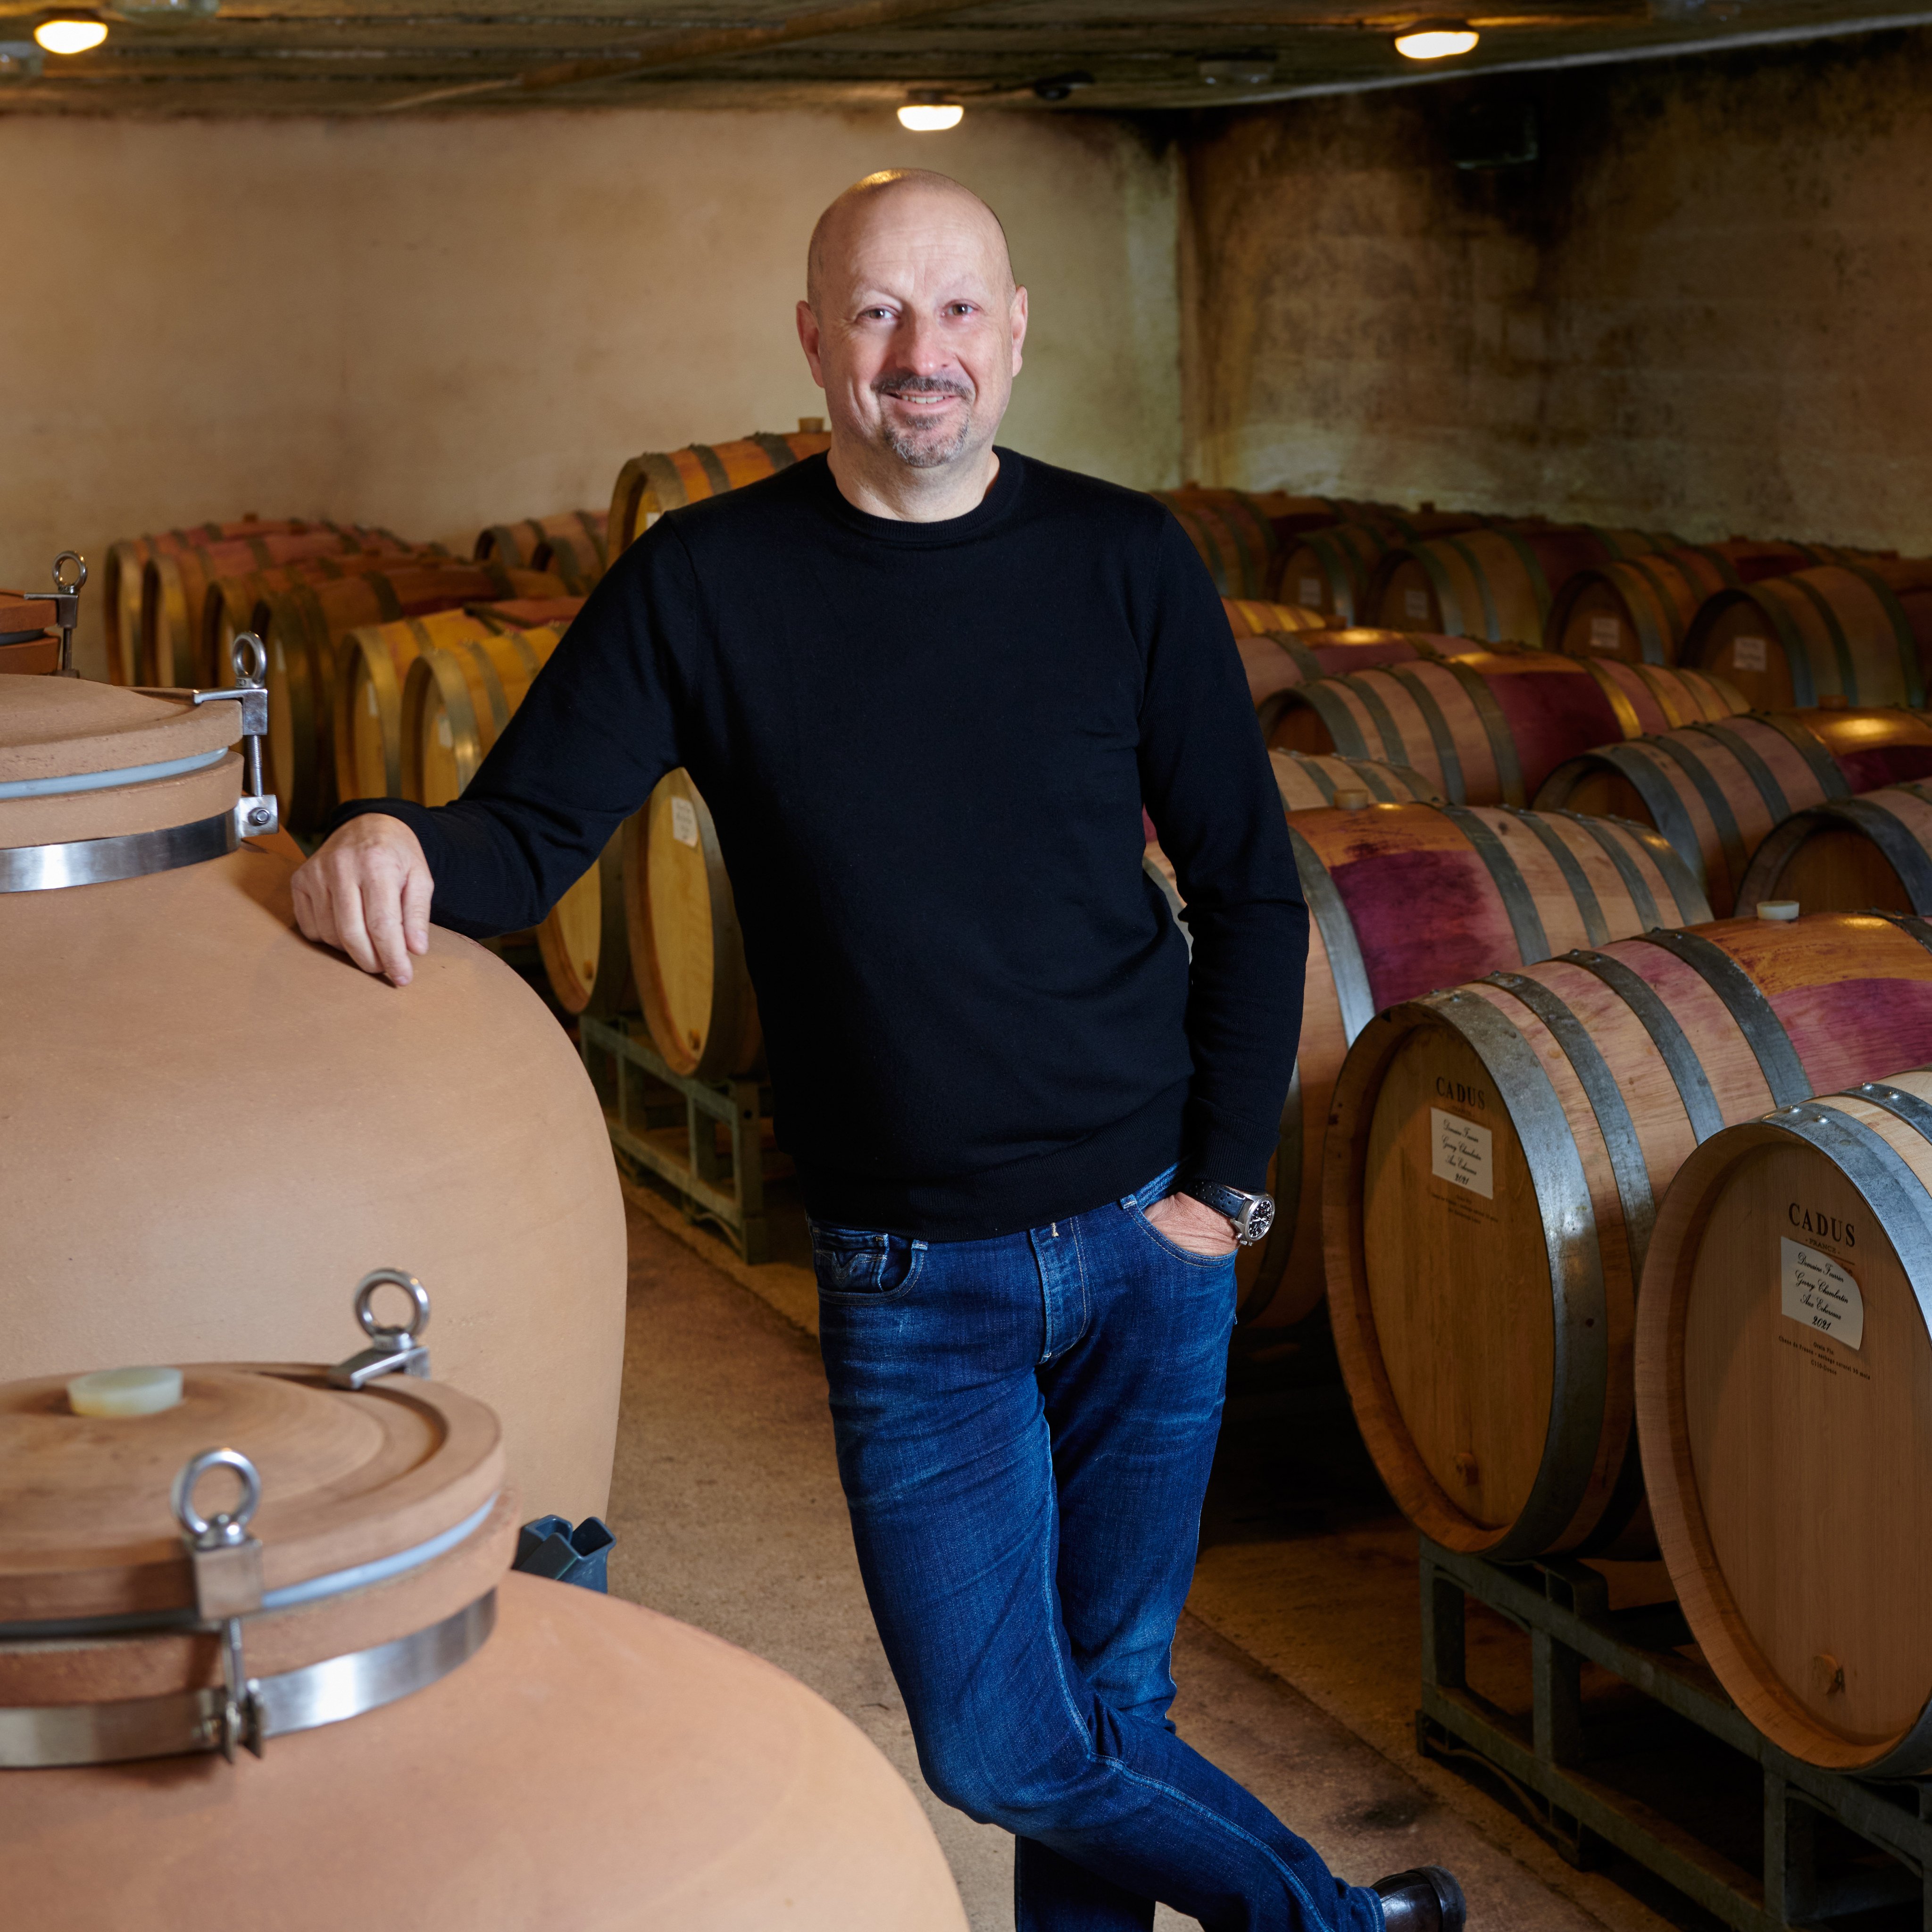 Jean-Marie Fourrier of Domaine Fourrier in Gevrey Chambertin, Burgundy, France, is an early adopter of NFTs to sell his wine. Through an online auction house, he hopes to reach more young consumers. Photo: Domaine Fourrier